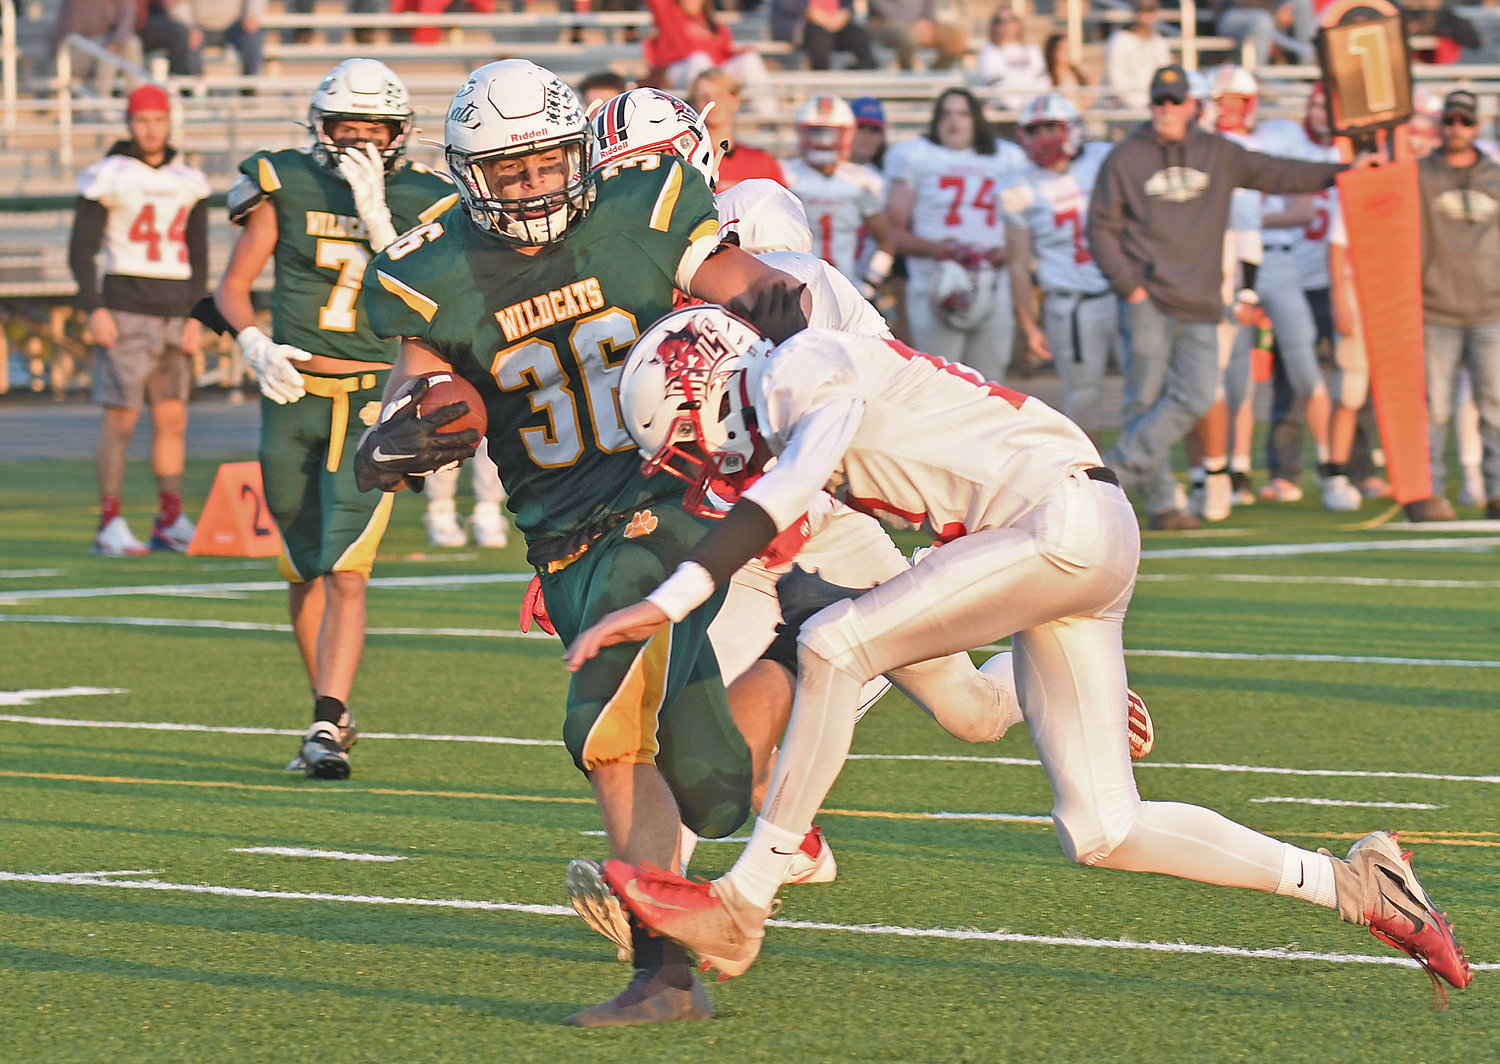 Vernon-Verona-Sherrill's Keaton Fox tries to bring down Adirondack's Colin White but was not able to as he ran in for his fourth touchdown in Thursday night's Class C-2 contest against visiting Vernon-Verona-Sherrill.